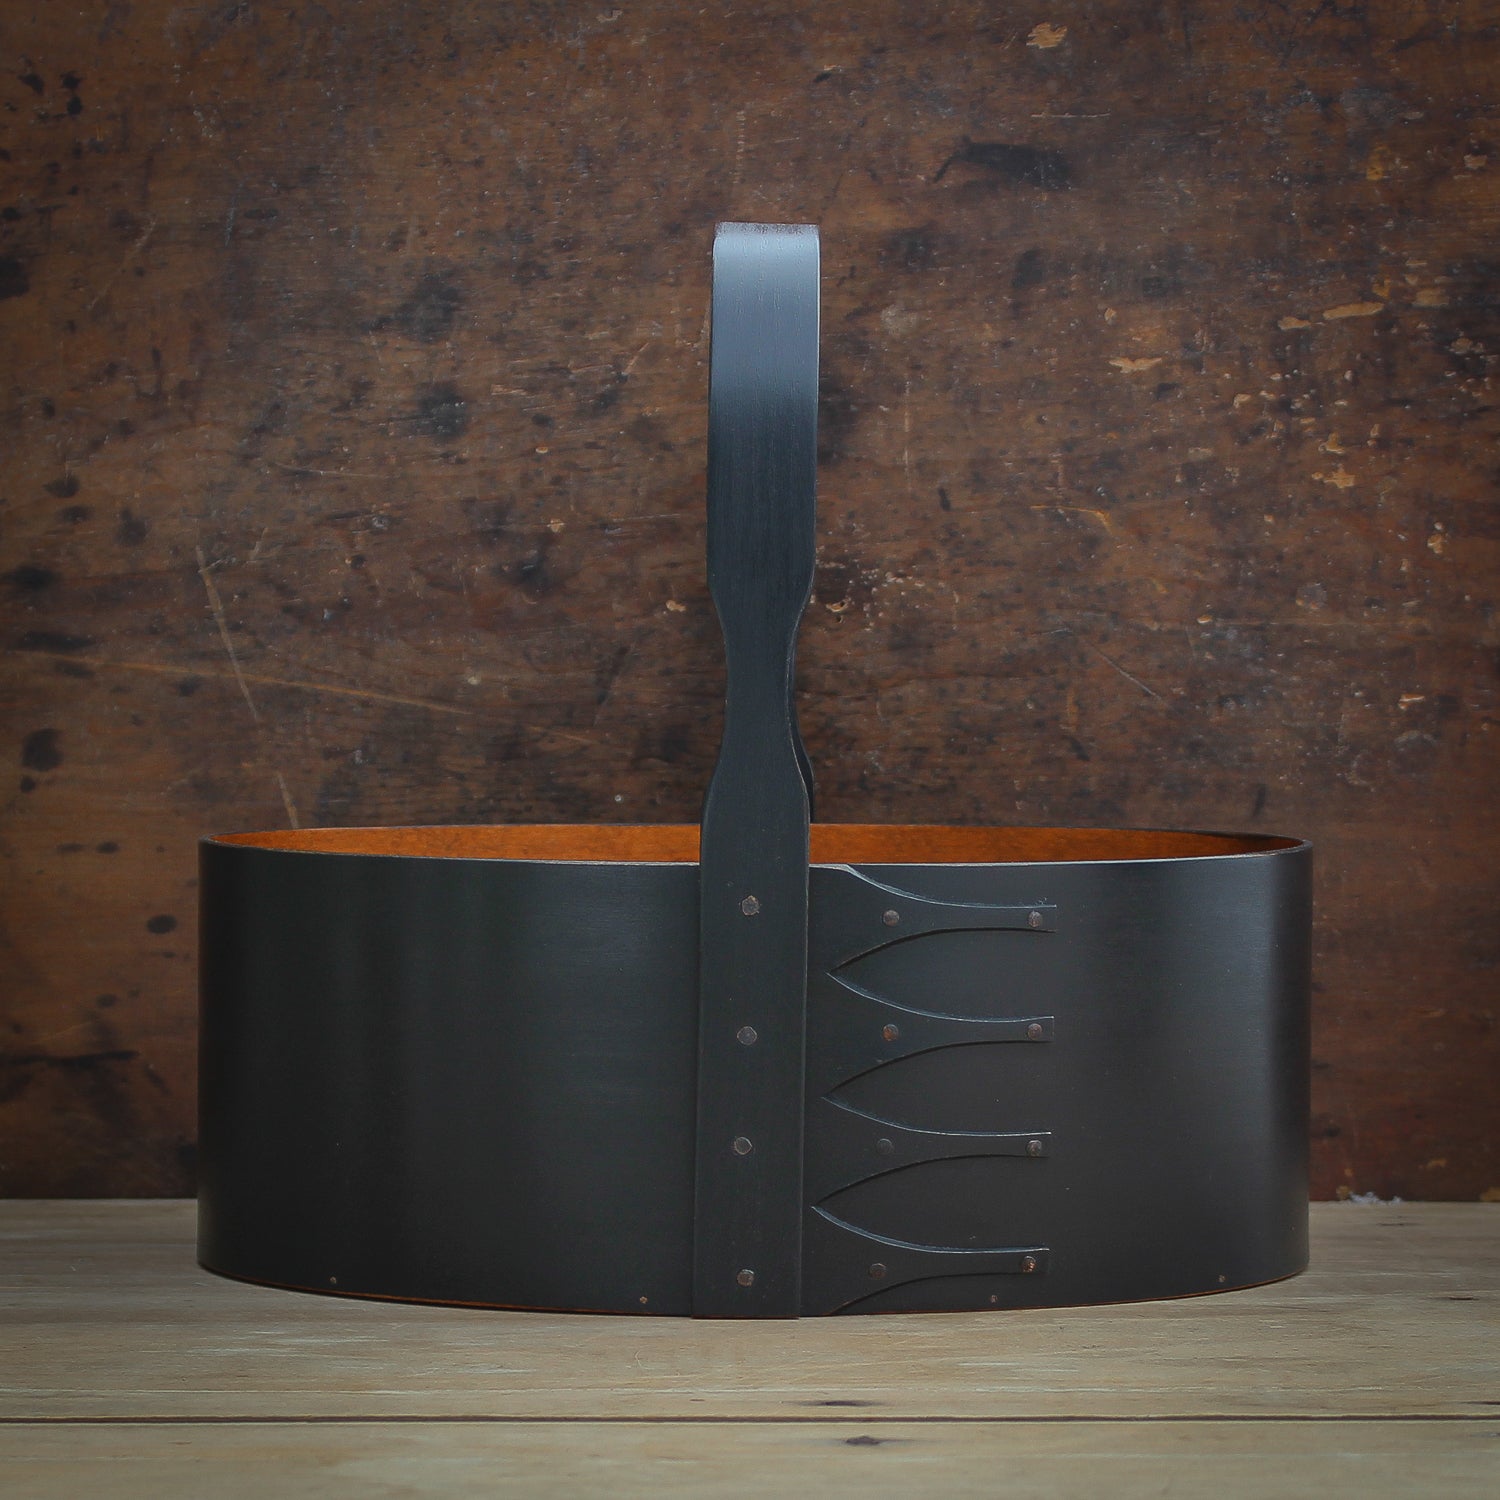 Shaker Carrier, Size #6, LeHays Shaker Boxes, Handcrafted in Maine, Black Milk Paint Finish, Front View